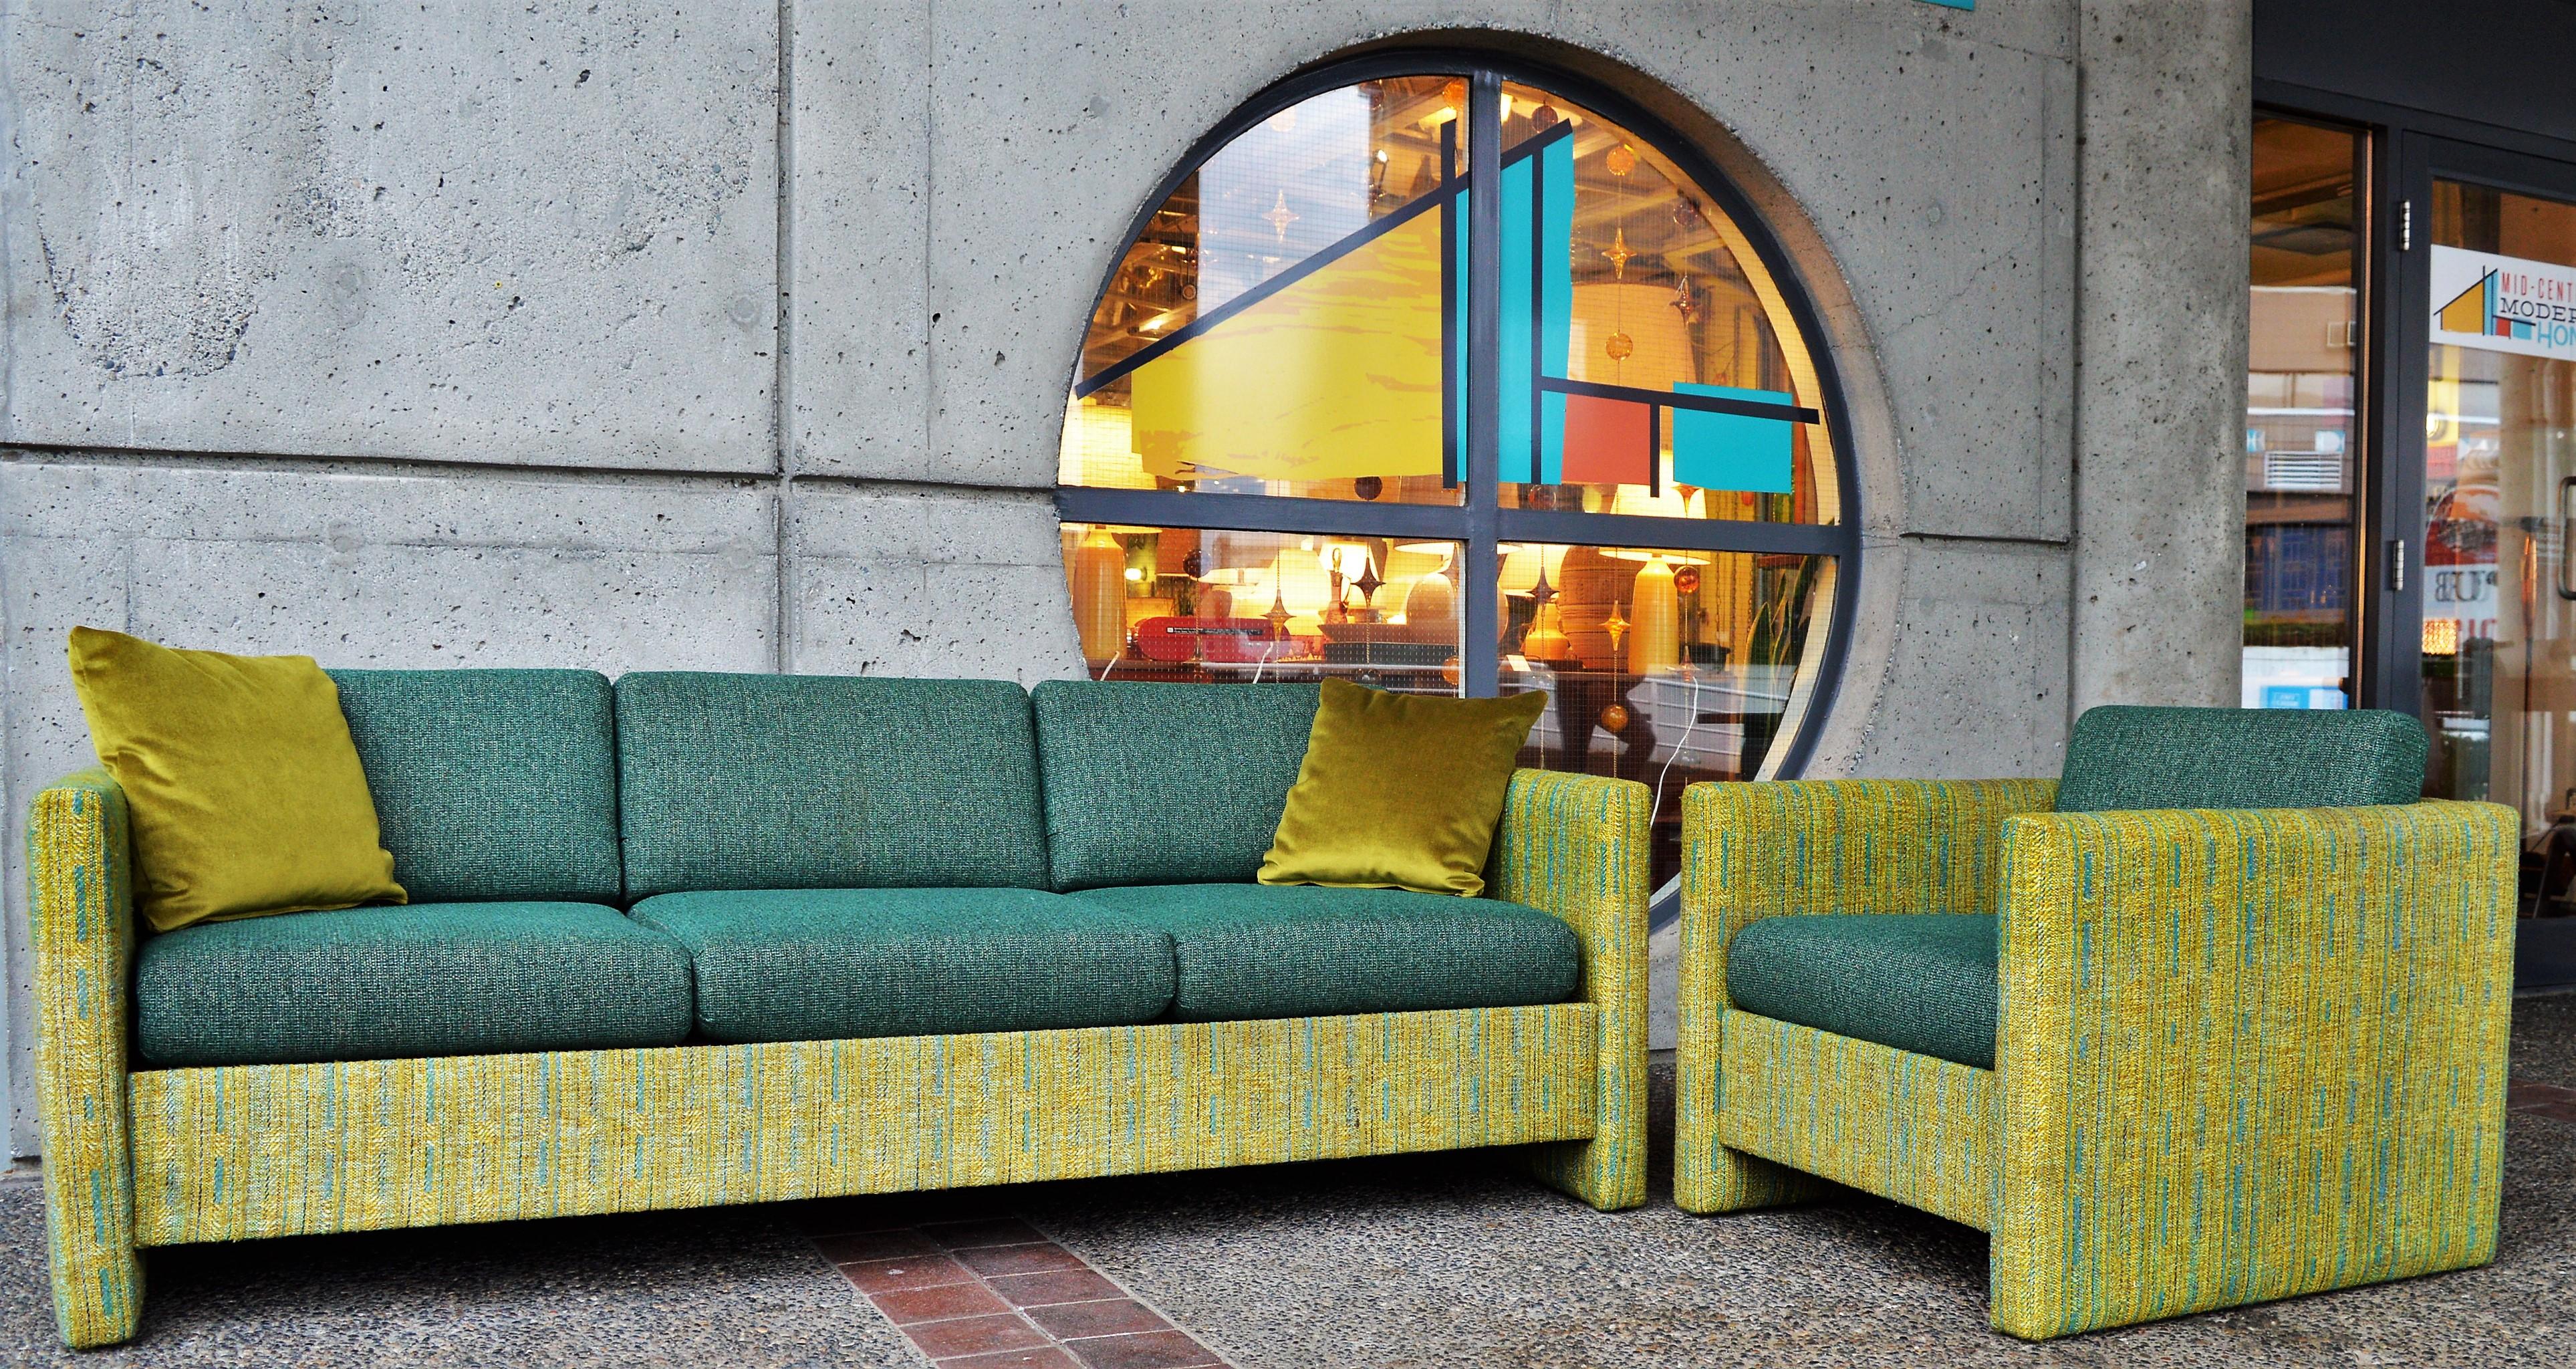 Midcentury Sofa and Club Chair in Teal Wool Cushions with Contrasting Print (Moderne der Mitte des Jahrhunderts)